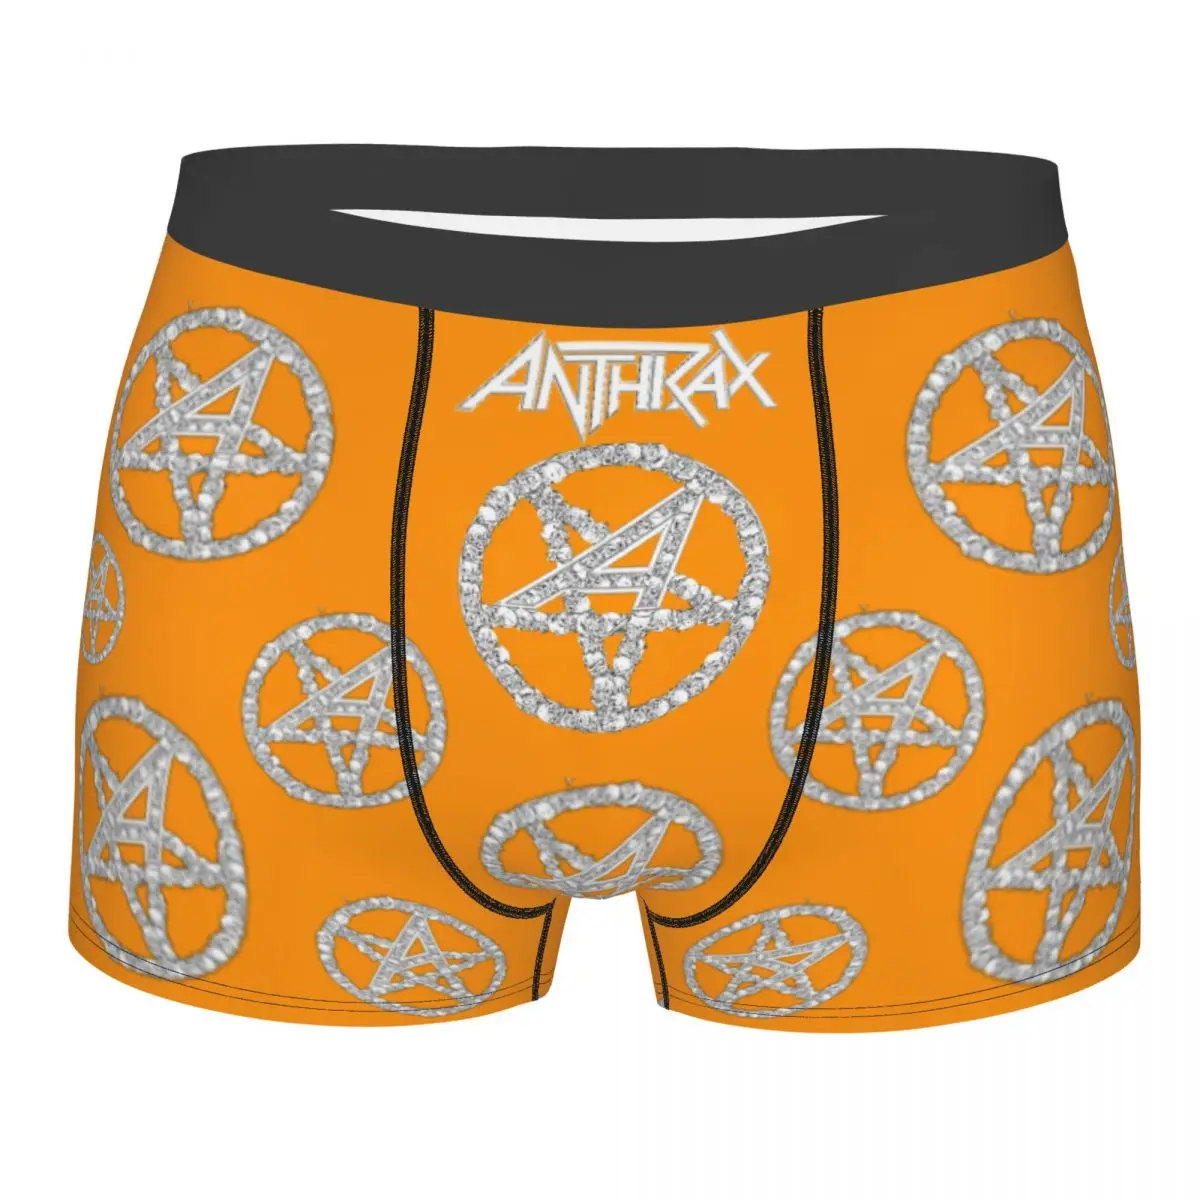 ANTHRAX BAND 1 Man's Printed Boxer Briefs Underwear ANTHRAX Highly Breathable Top Quality Birthday Gifts